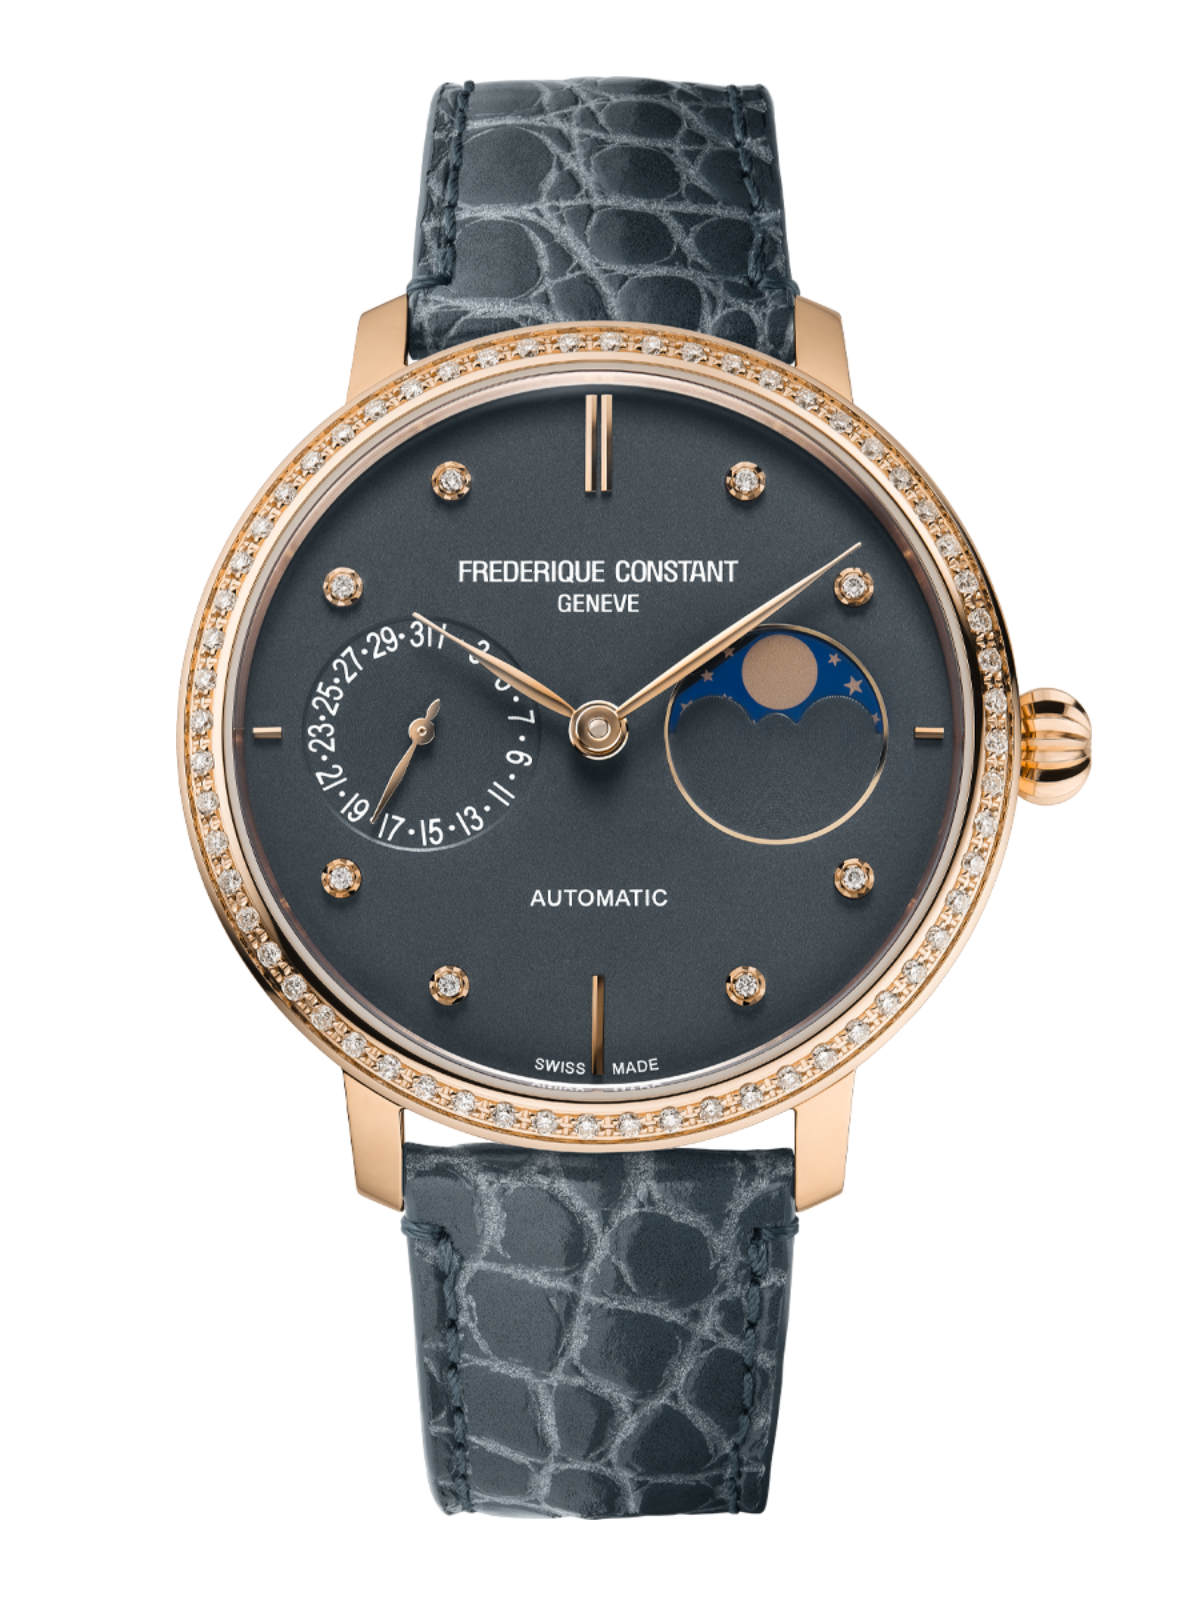 New Moons For The Slimline Moonphase Manufacture